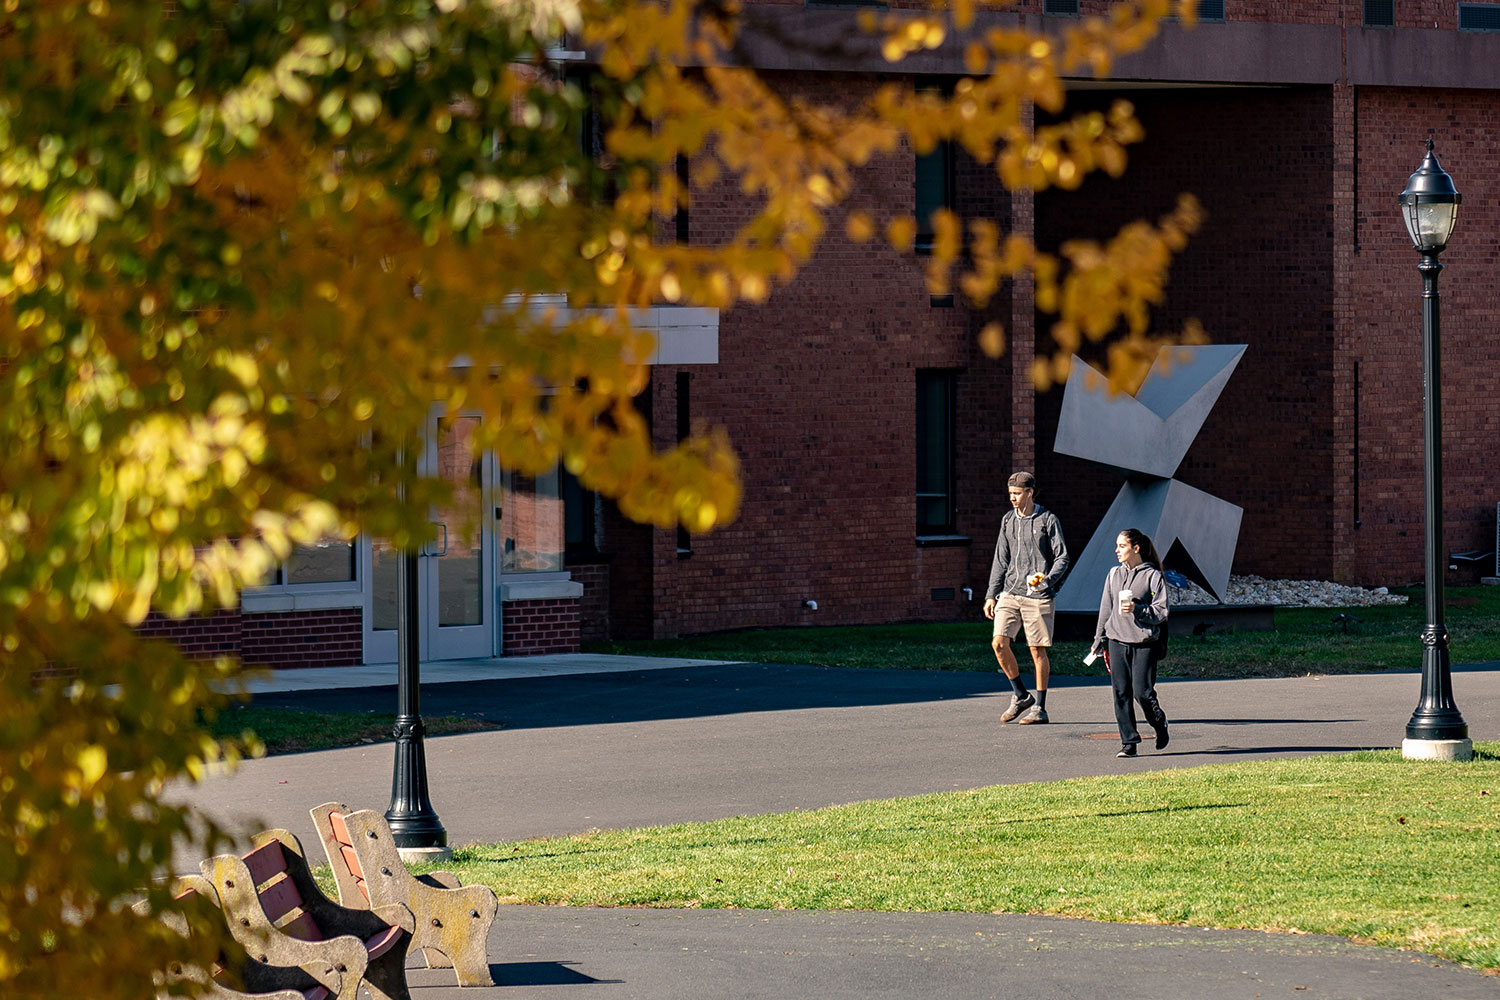 Two students in the distance walking through campus in fall